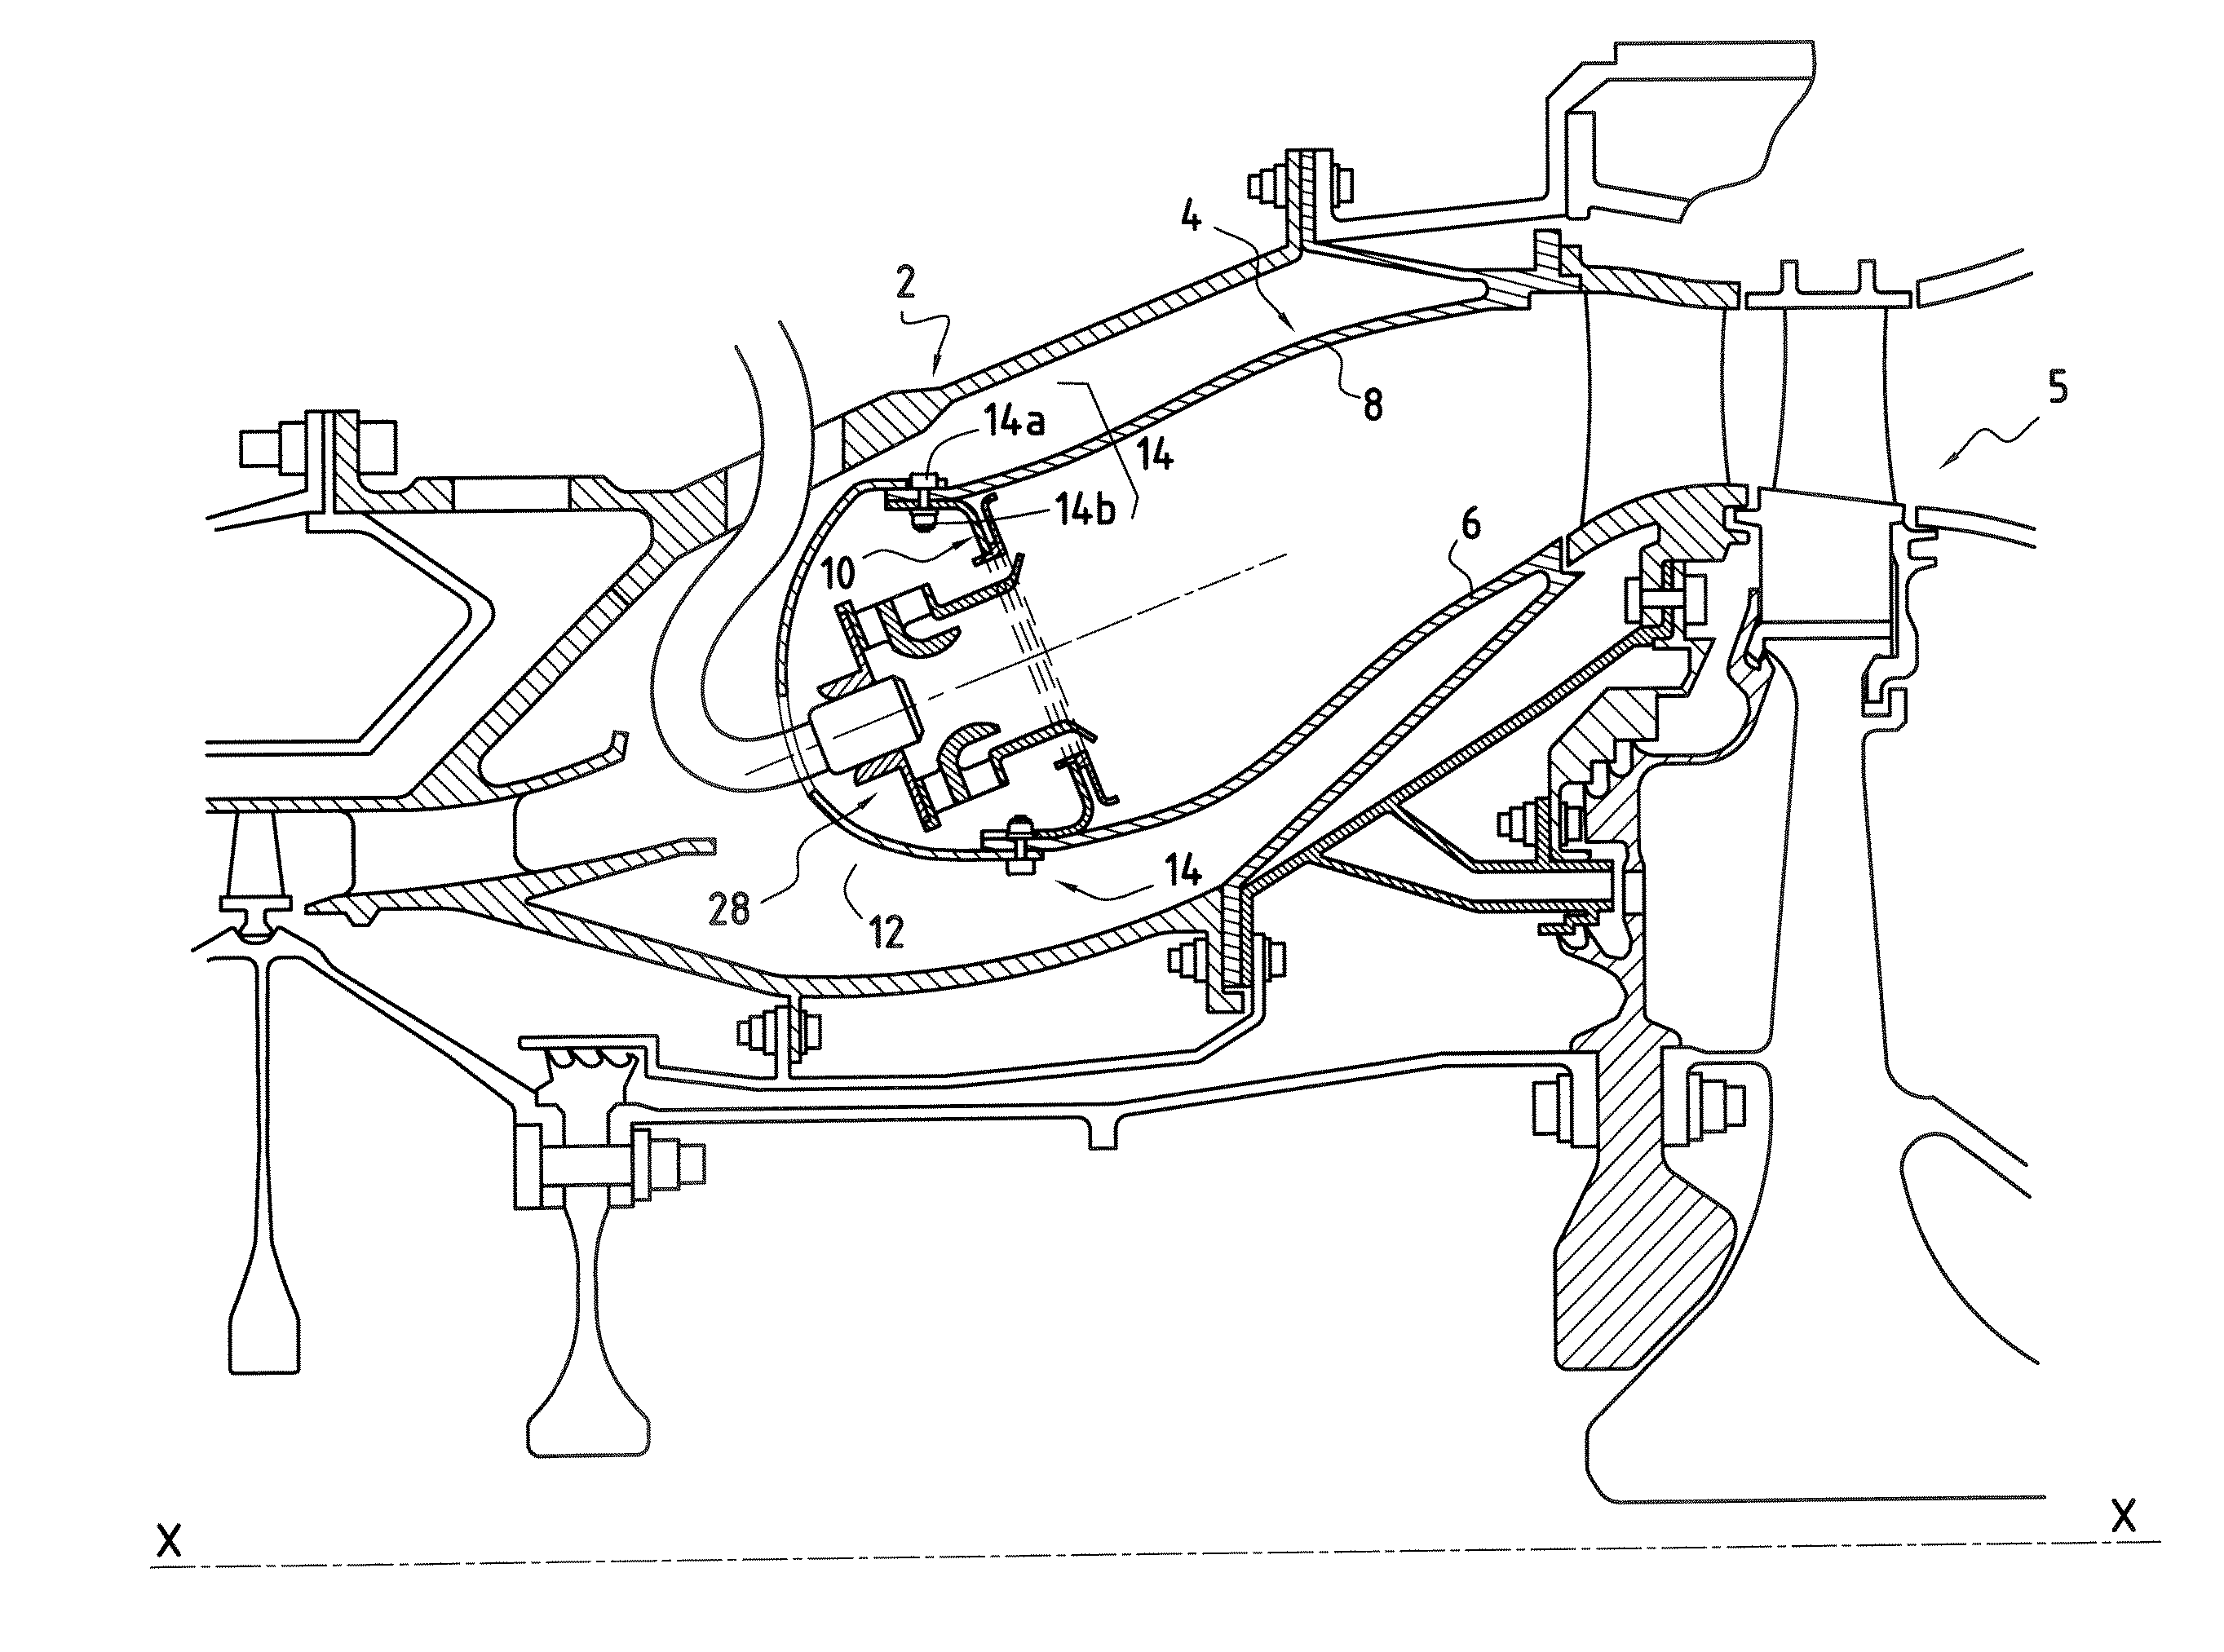 Turbine engine combustion chamber with tangential slots